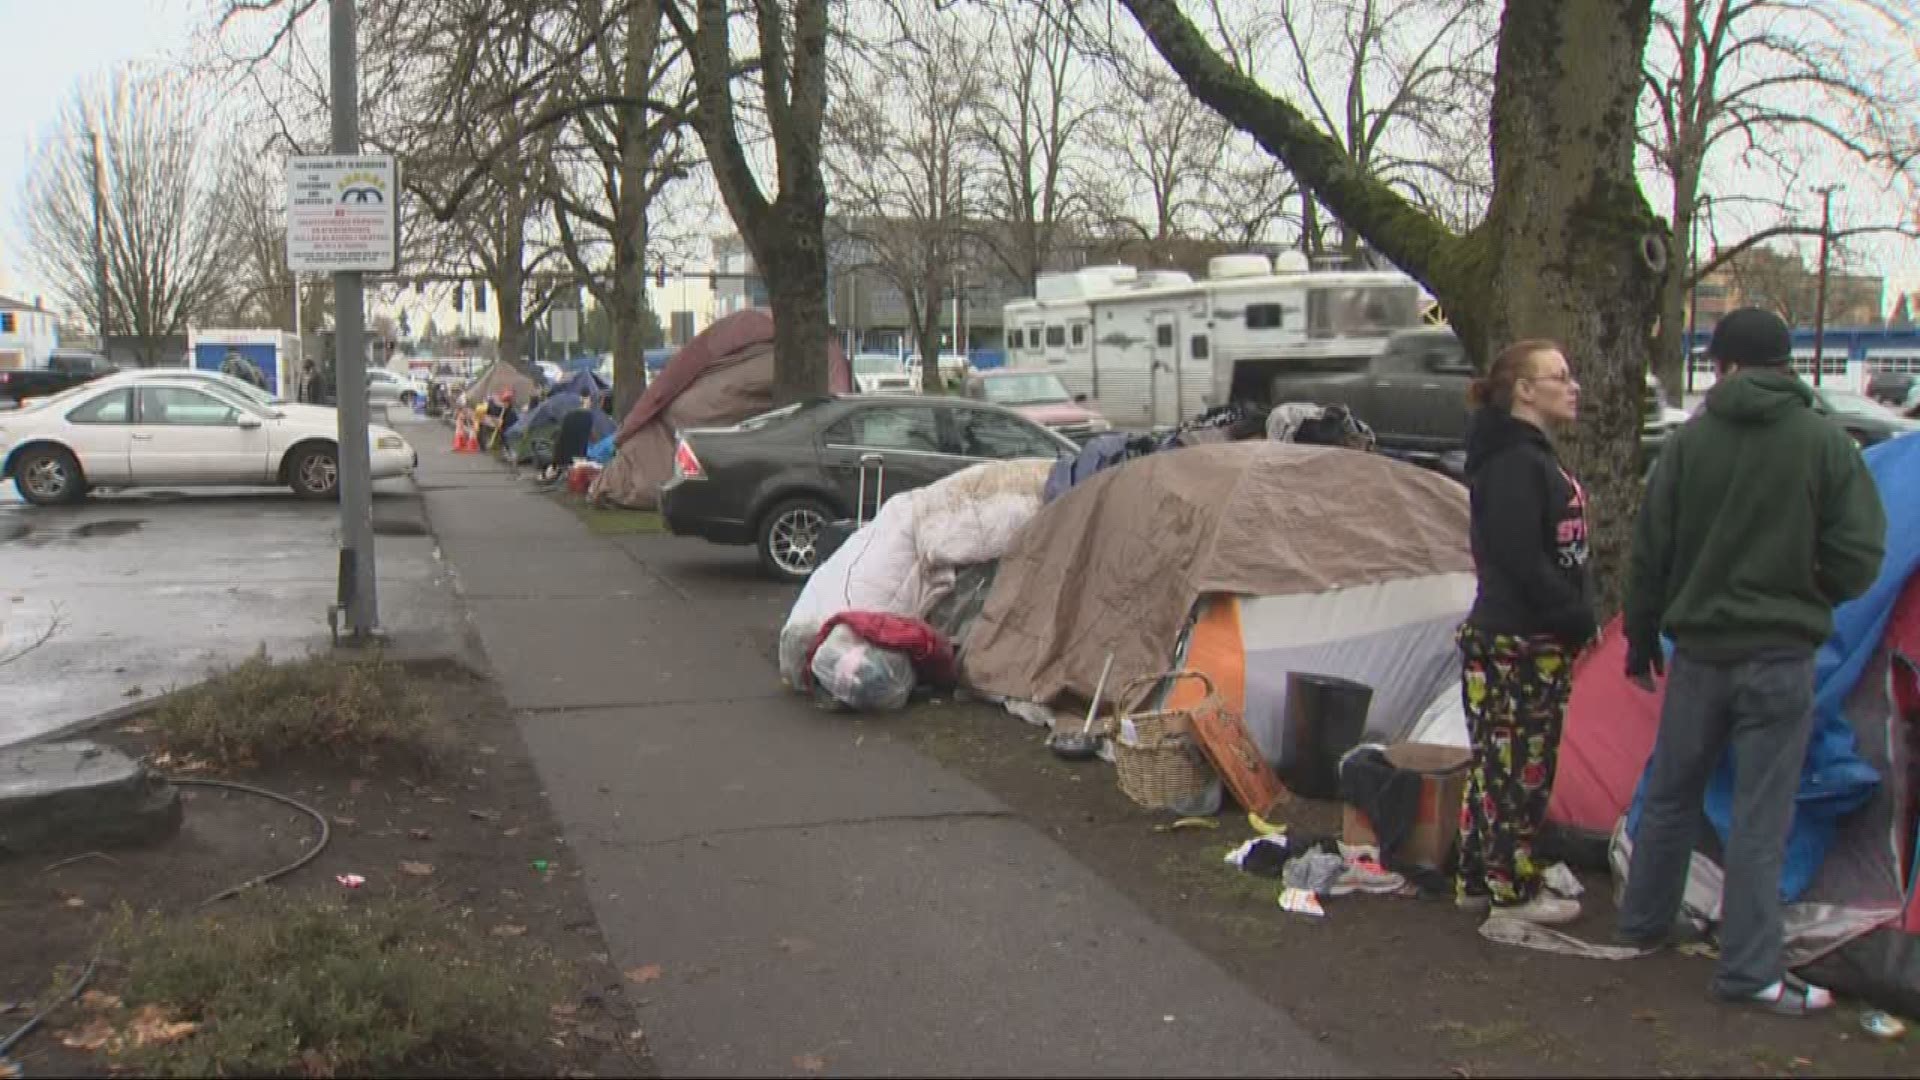 Salem is considering a new crackdown on the city’s homeless. Maggie Vespa explains.